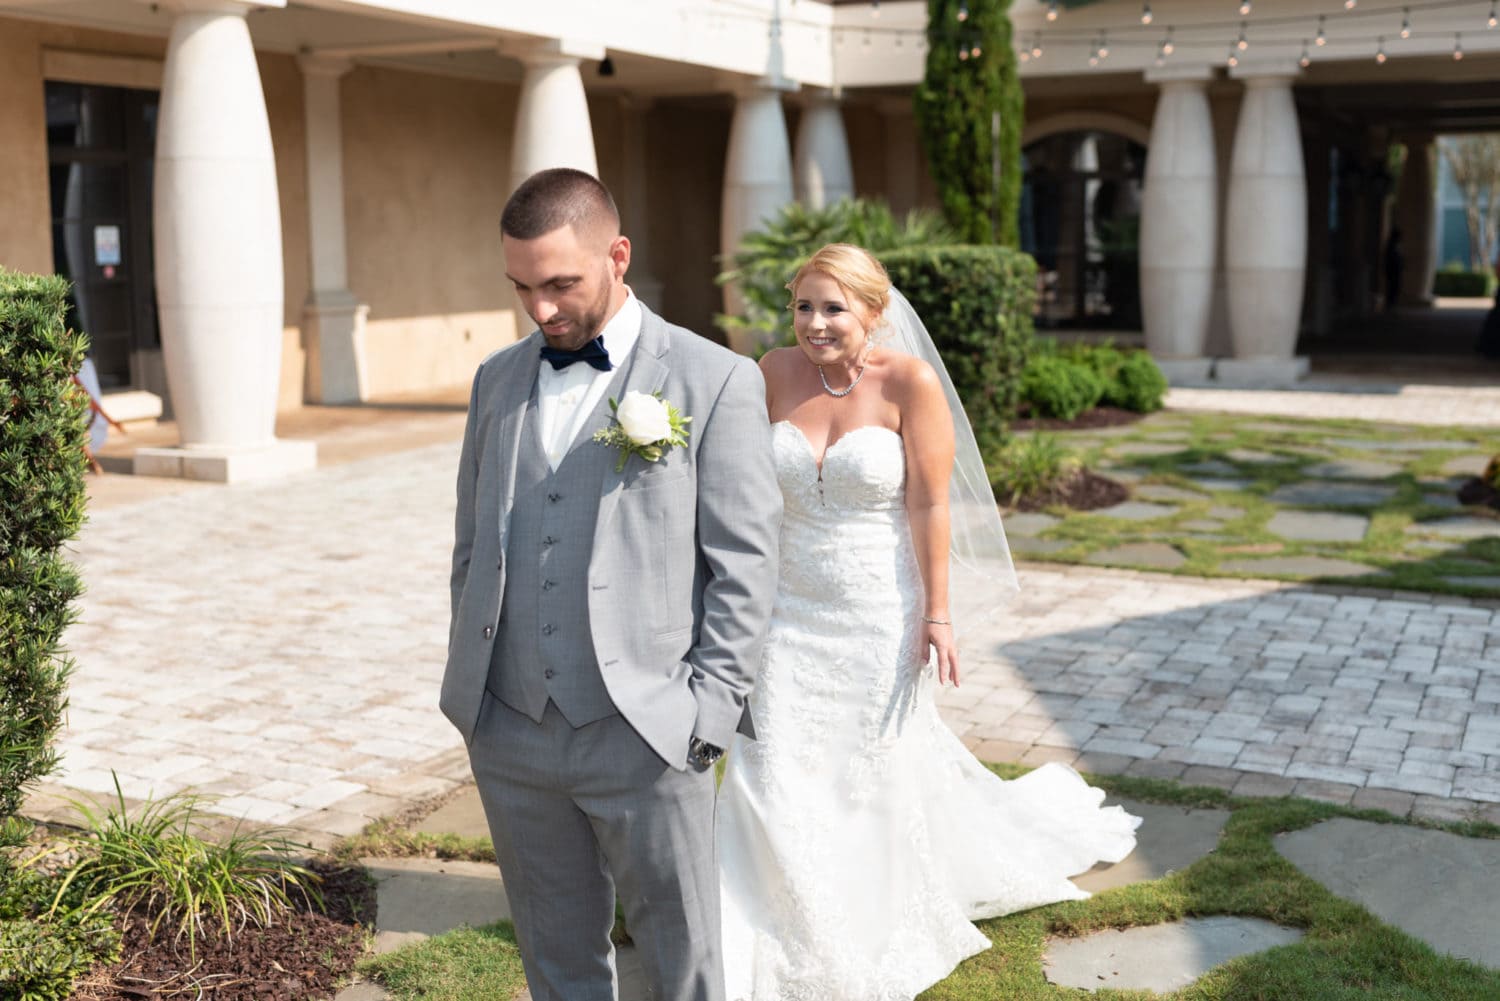 First look with the bride and groom - 21 Main Events - North Myrtle Beach